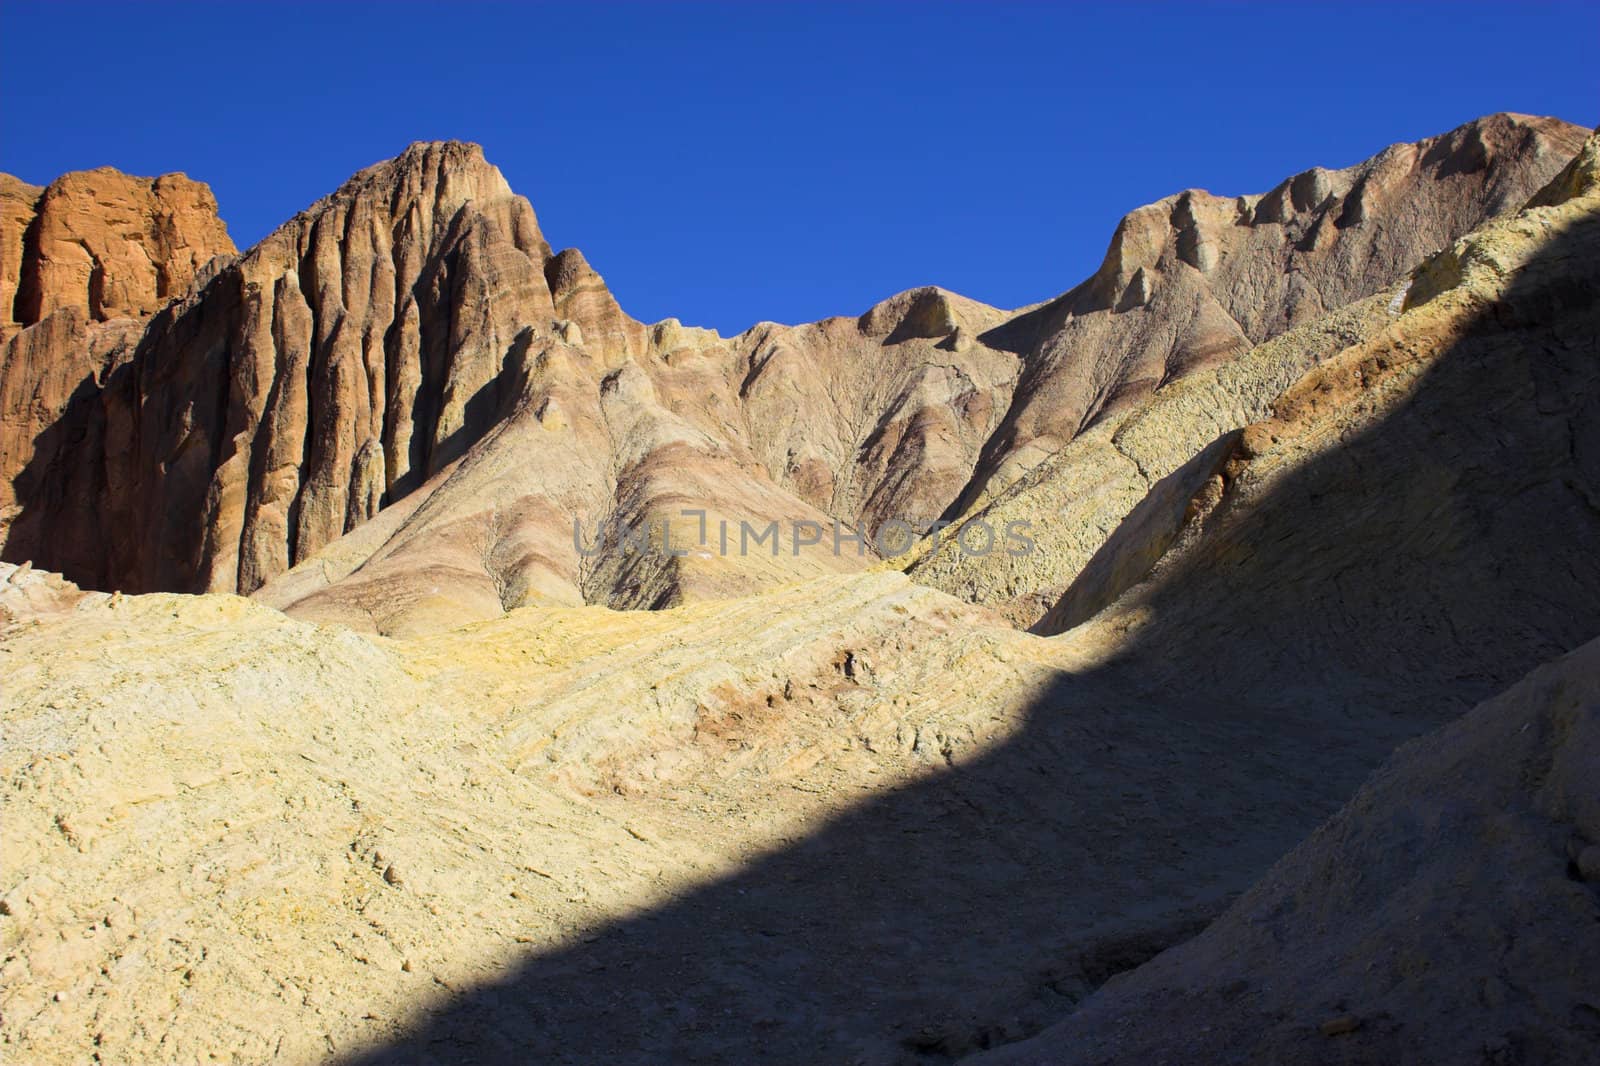 Desert landscape with multicolored yellow clay and salt mineral deposits in geological formations of Death Valley National Park